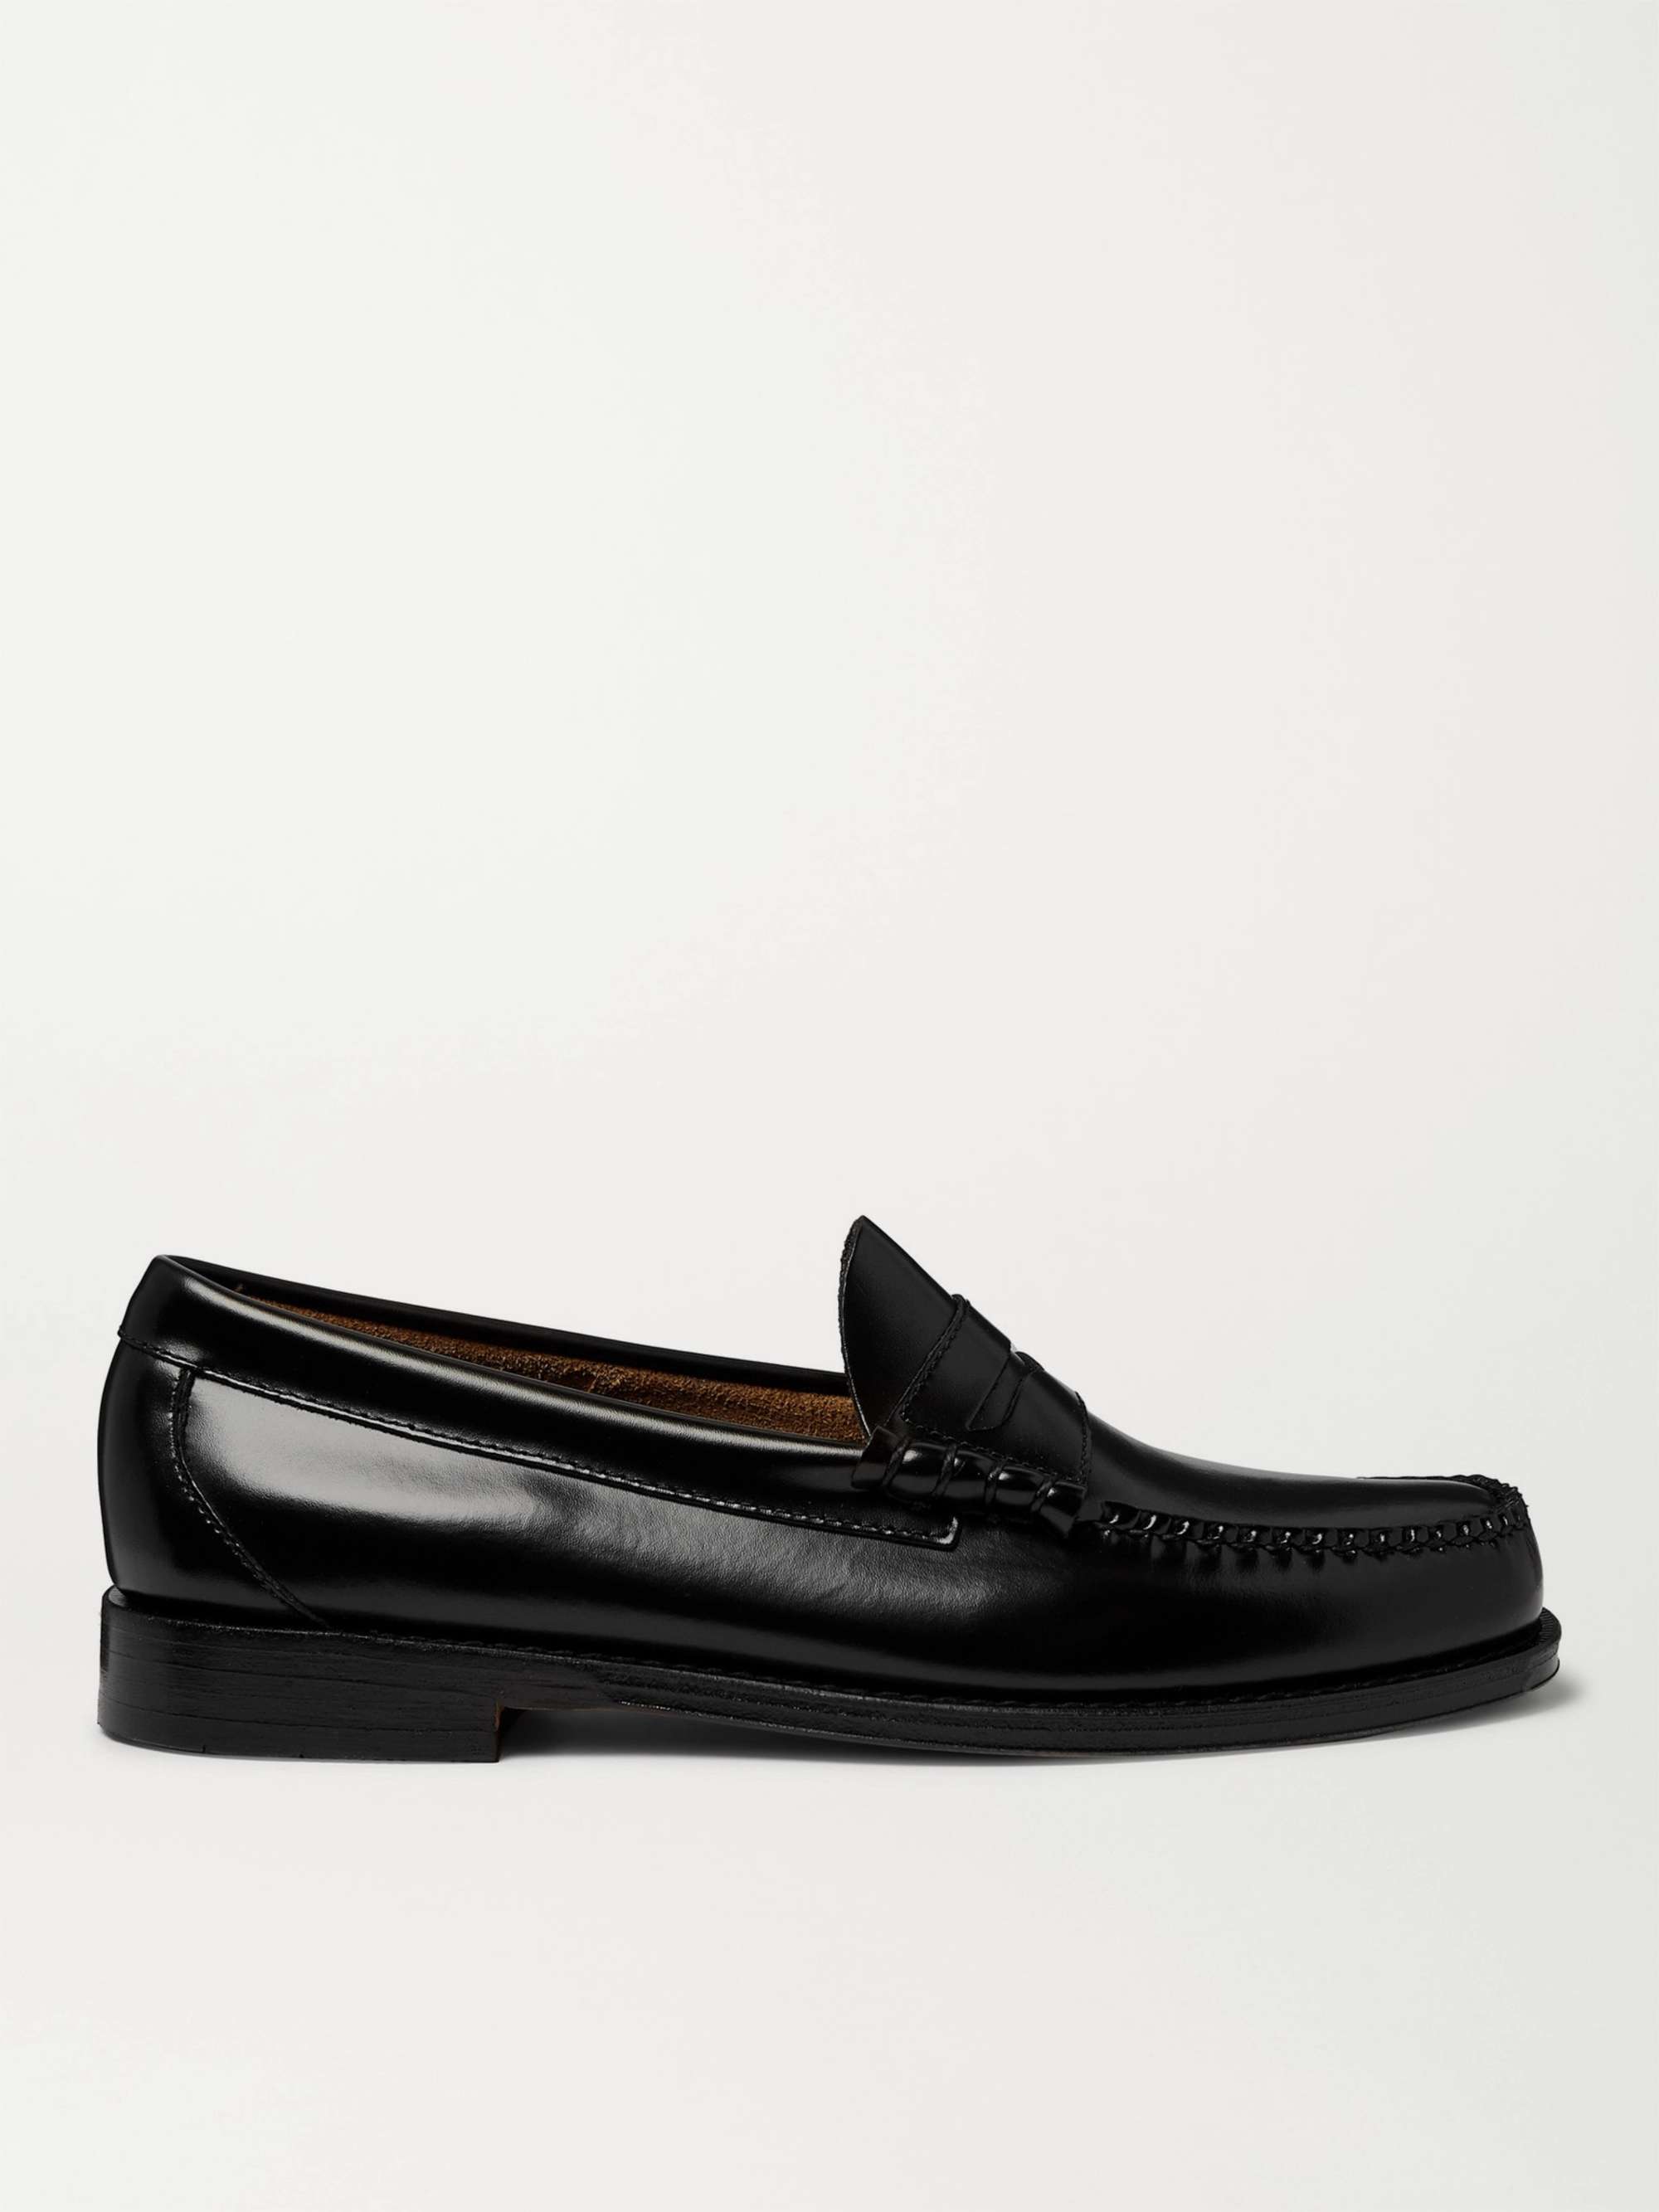 G.H. BASS & CO. Weejuns Heritage Larson Leather Penny Loafers | MR PORTER